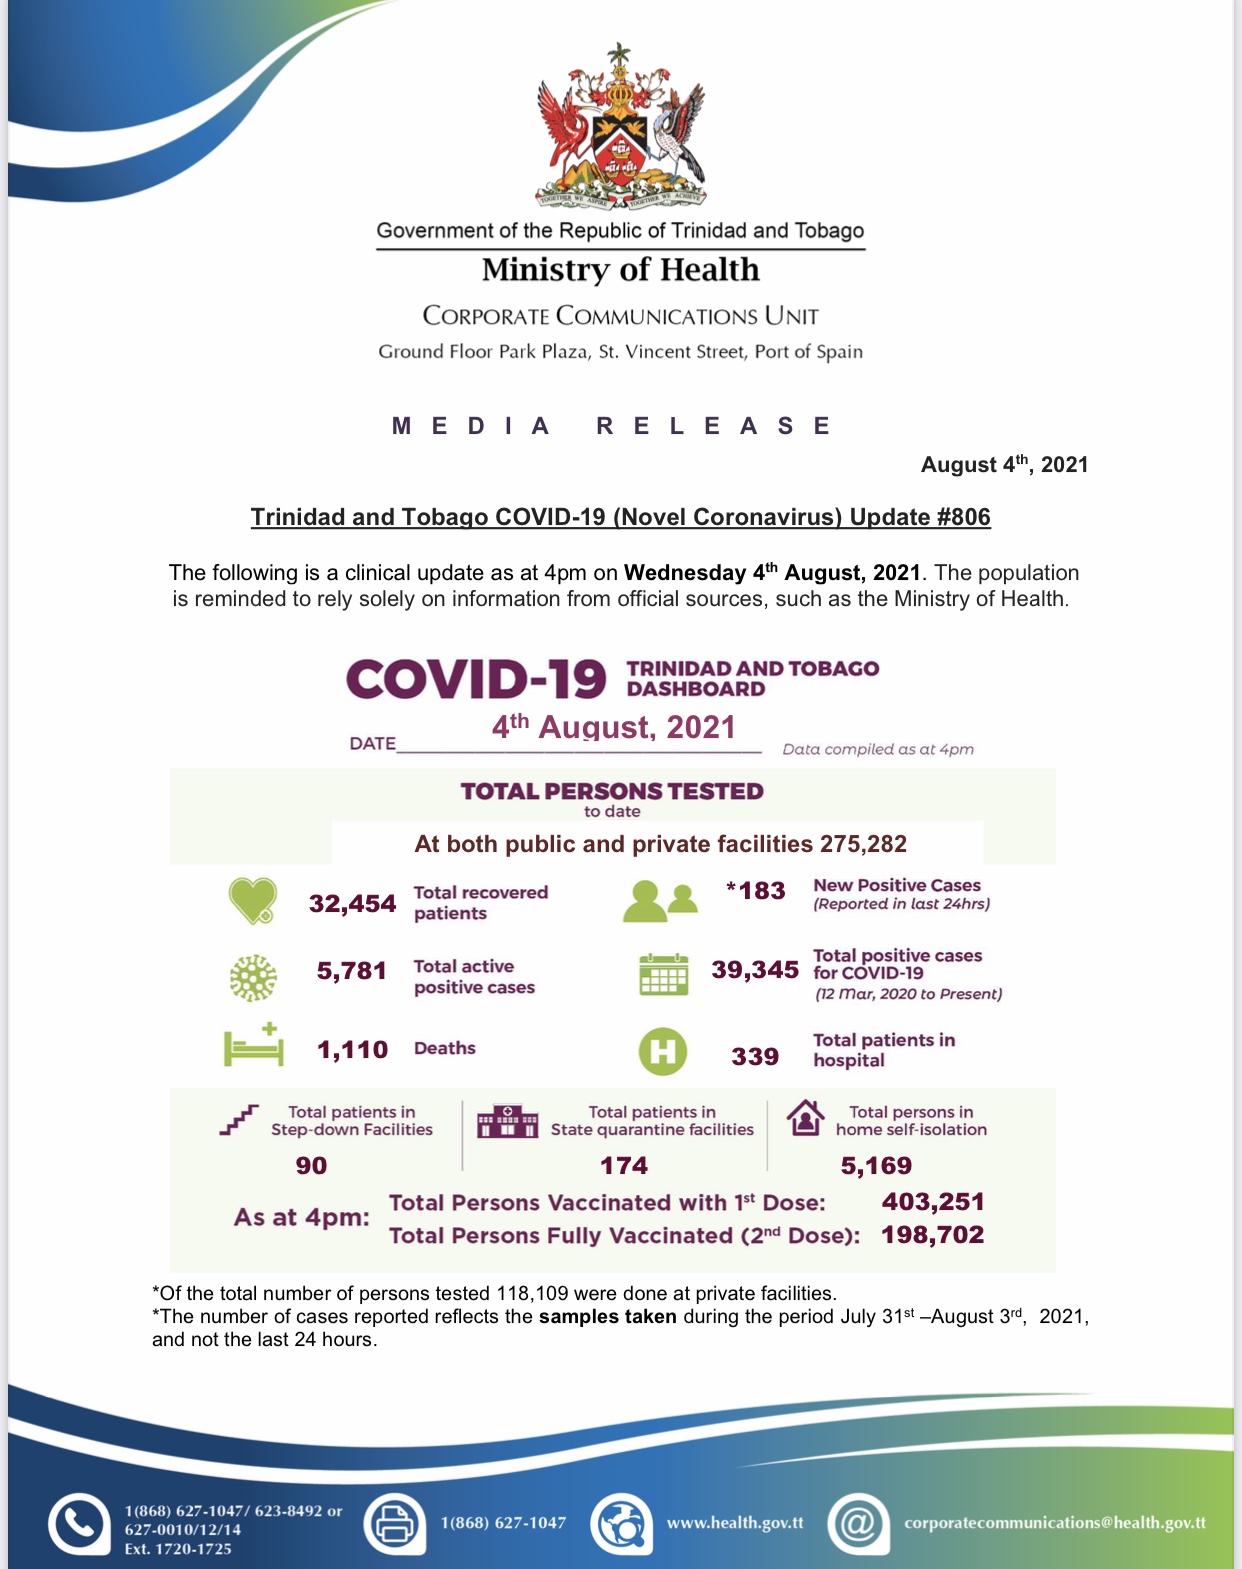 MOH Covid update : 9 deaths and 183 new positive cases